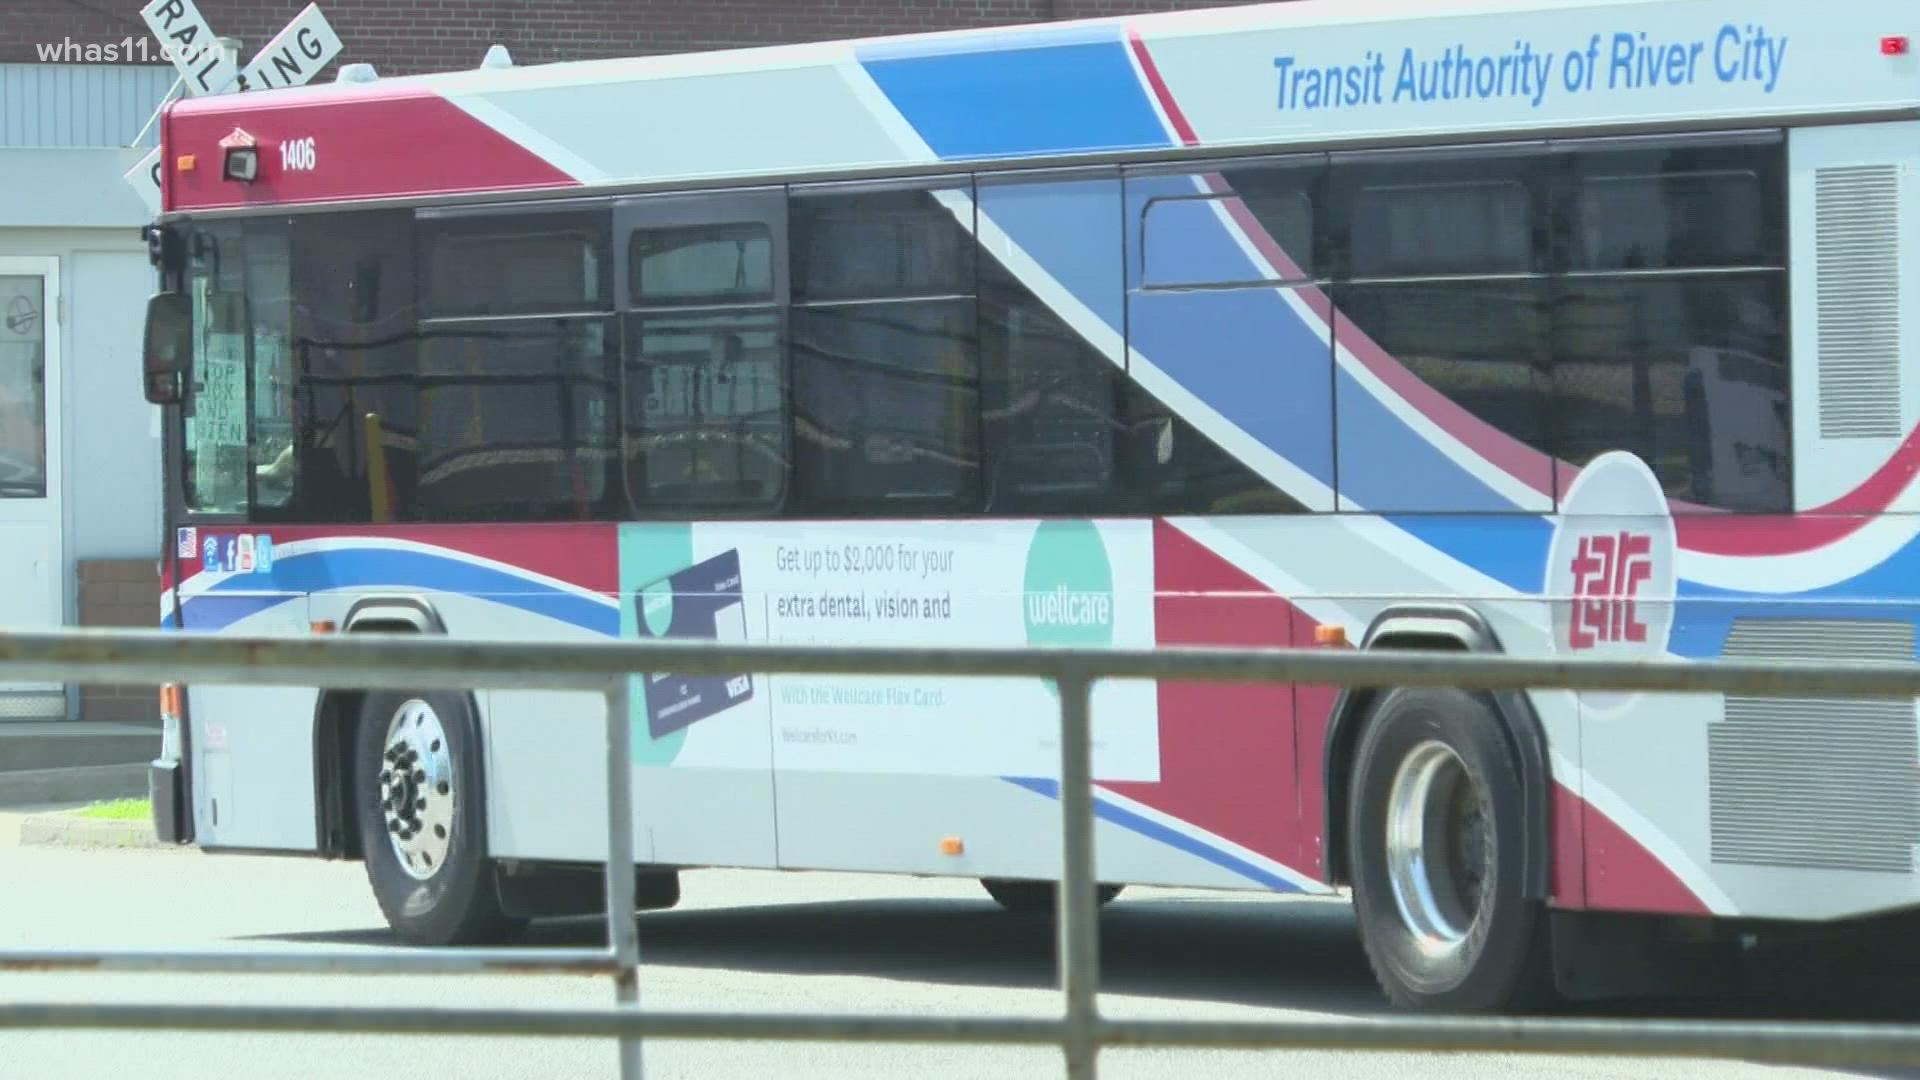 Some of the ongoing problems with the Louisville's transit system are coming to light once again as they are negotiation with the employee's union on a new contract.